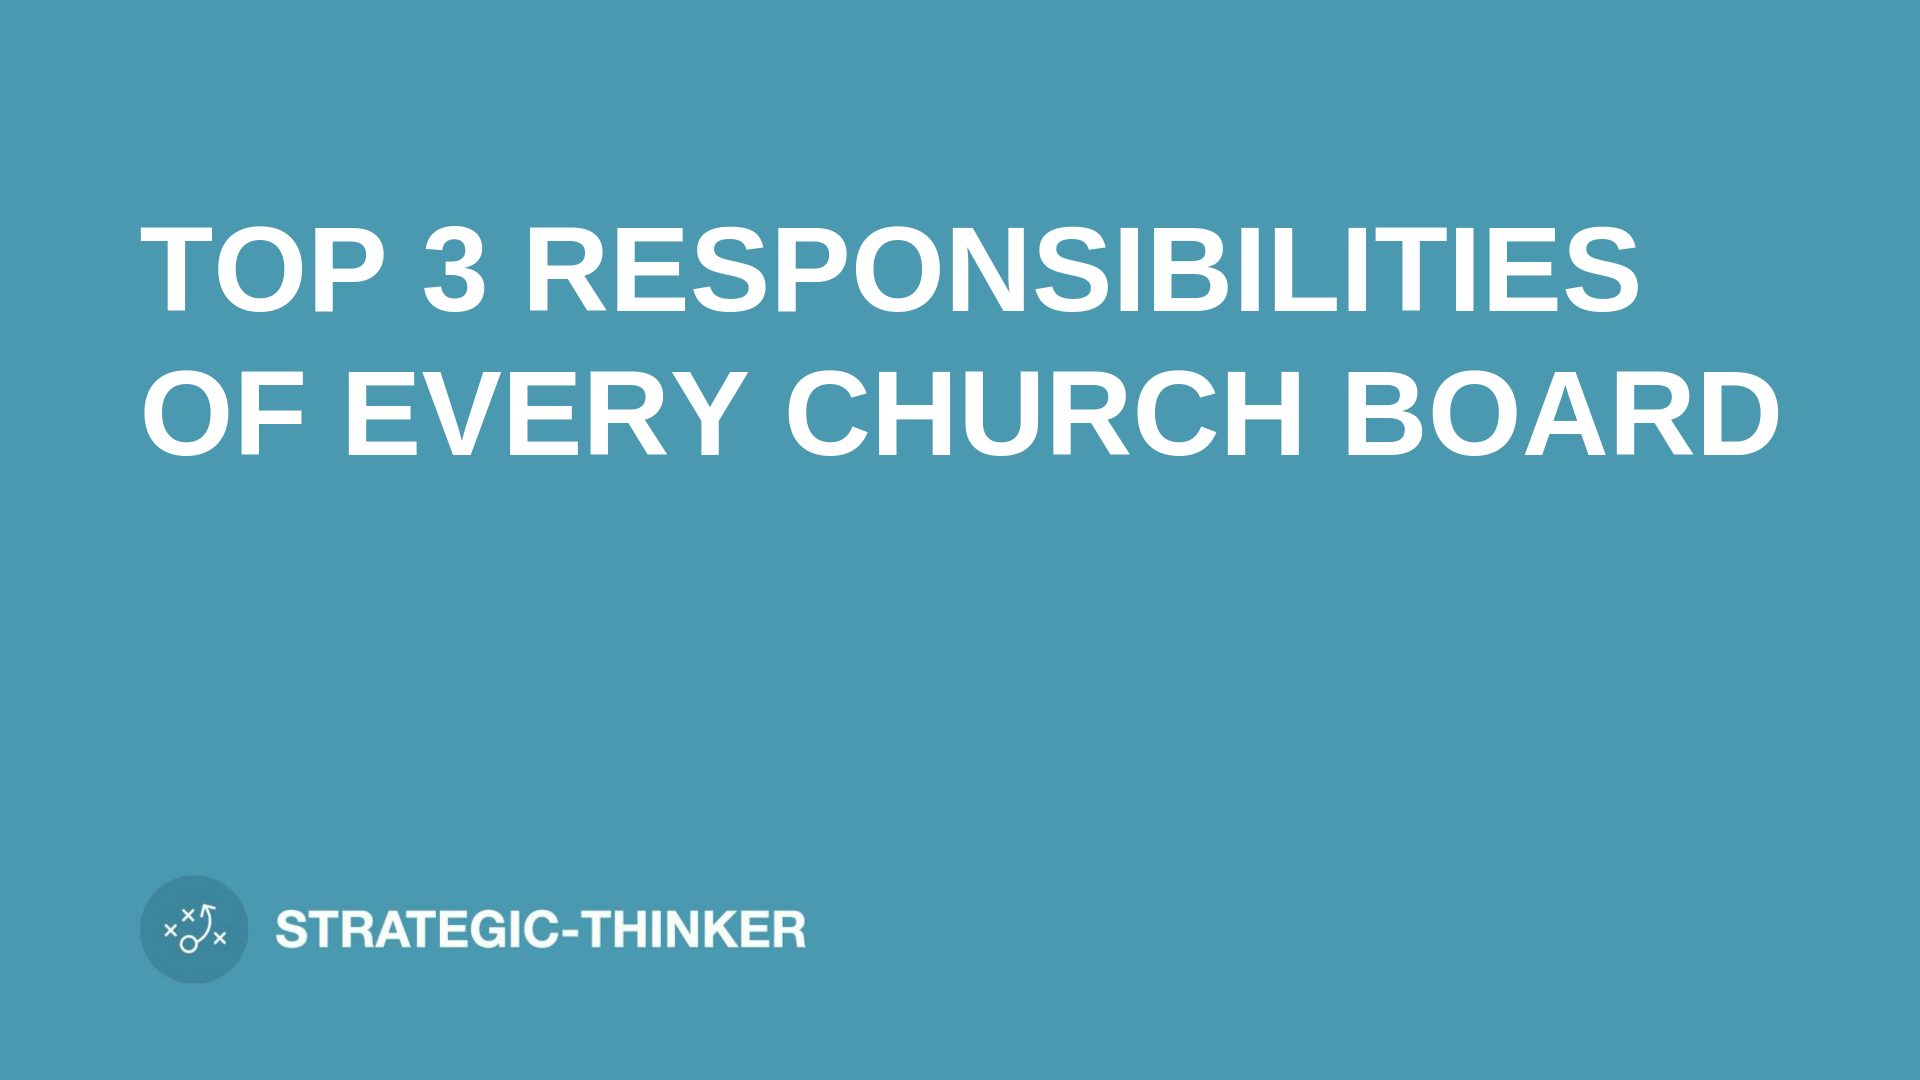 text "TOP 3 RESPONSIBILITIES OF EVERY CHURCH BOARD" on blue background